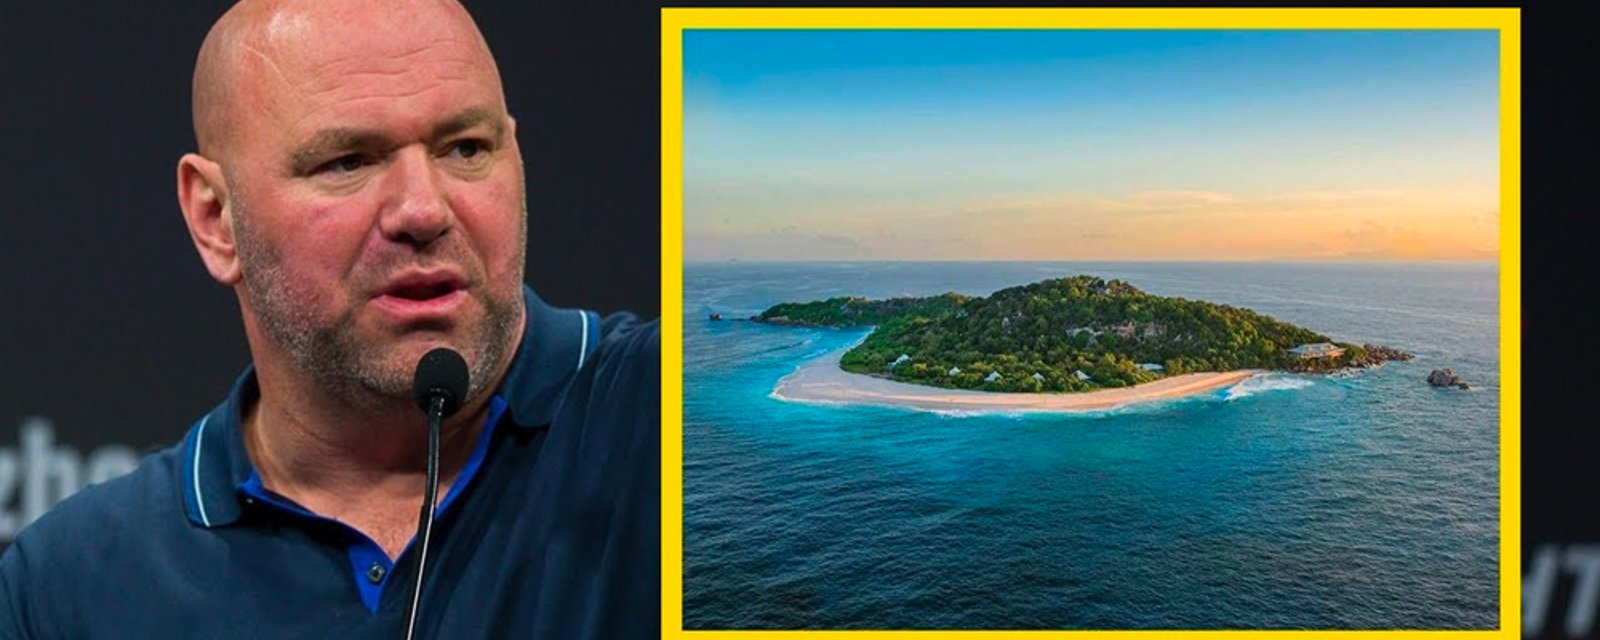 Dana White purchasing private Island to hold UFC fights